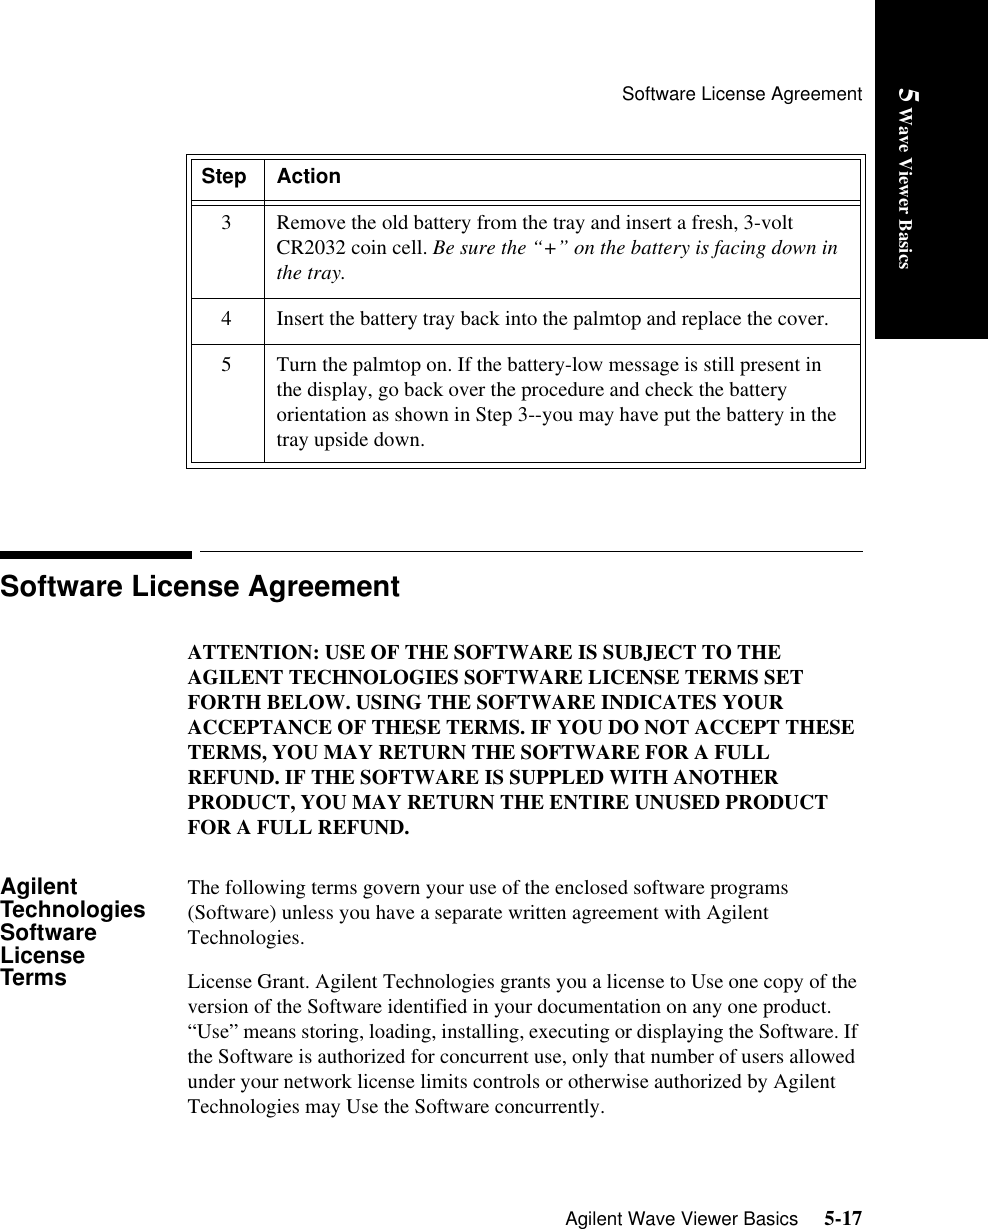 Software License AgreementAgilent Wave Viewer Basics     5-175 Wave Viewer BasicsSoftware License AgreementATTENTION: USE OF THE SOFTWARE IS SUBJECT TO THE AGILENT TECHNOLOGIES SOFTWARE LICENSE TERMS SET FORTH BELOW. USING THE SOFTWARE INDICATES YOUR ACCEPTANCE OF THESE TERMS. IF YOU DO NOT ACCEPT THESE TERMS, YOU MAY RETURN THE SOFTWARE FOR A FULL REFUND. IF THE SOFTWARE IS SUPPLED WITH ANOTHER PRODUCT, YOU MAY RETURN THE ENTIRE UNUSED PRODUCT FOR A FULL REFUND. Agilent Technologies Software License TermsThe following terms govern your use of the enclosed software programs (Software) unless you have a separate written agreement with Agilent Technologies.License Grant. Agilent Technologies grants you a license to Use one copy of the version of the Software identified in your documentation on any one product. “Use” means storing, loading, installing, executing or displaying the Software. If the Software is authorized for concurrent use, only that number of users allowed under your network license limits controls or otherwise authorized by Agilent Technologies may Use the Software concurrently.3 Remove the old battery from the tray and insert a fresh, 3-volt CR2032 coin cell. Be sure the “+” on the battery is facing down in the tray.4 Insert the battery tray back into the palmtop and replace the cover.5 Turn the palmtop on. If the battery-low message is still present in the display, go back over the procedure and check the battery orientation as shown in Step 3--you may have put the battery in the tray upside down.Step Action